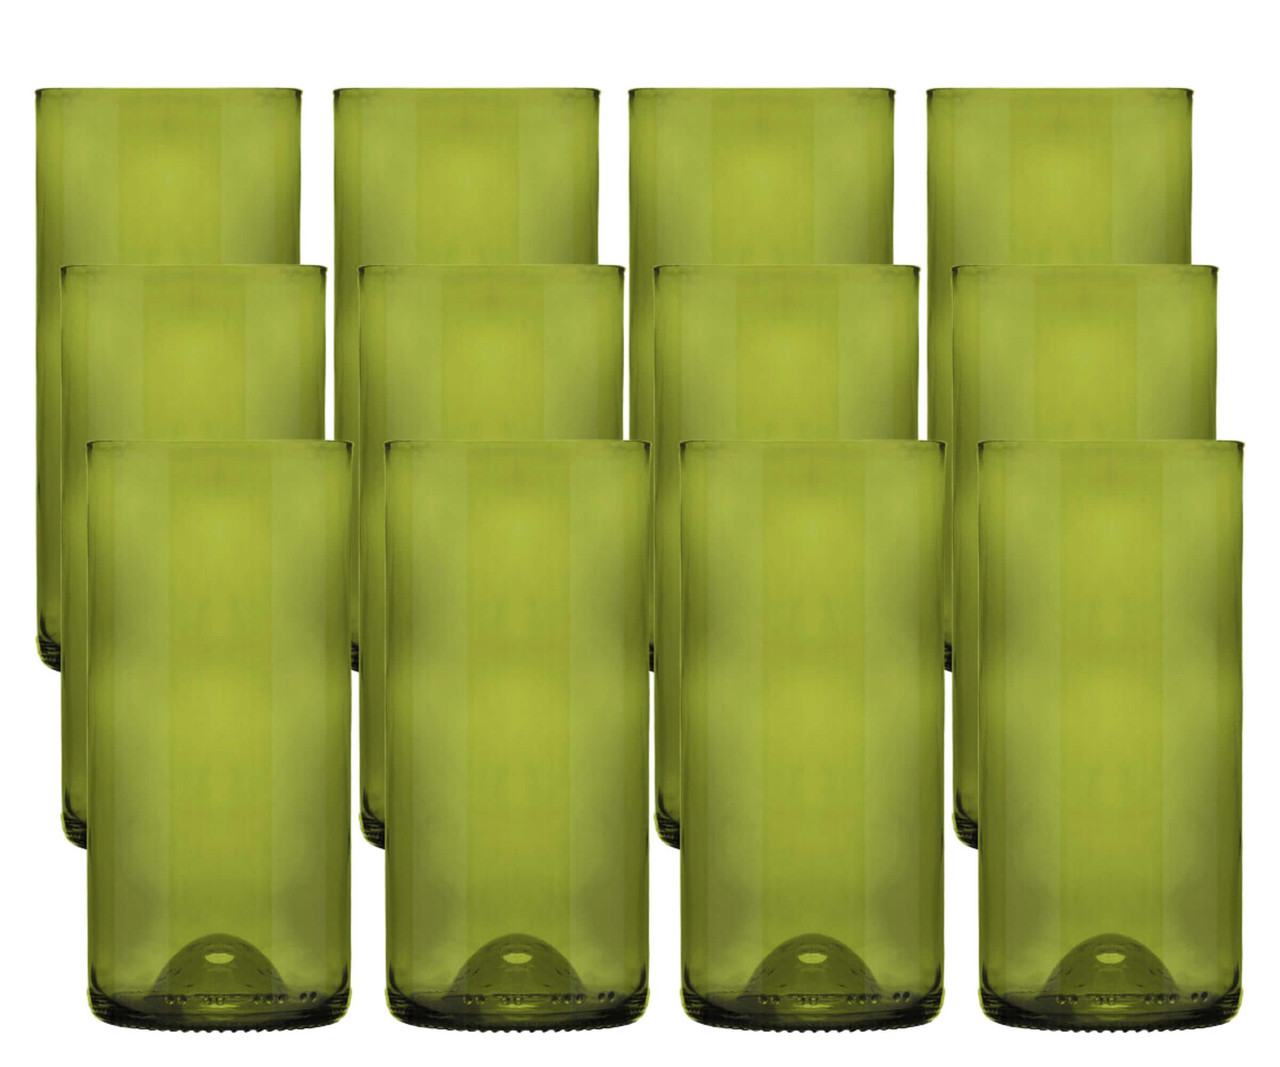 Libbey 12-Case of 16 oz. Green Repurposed Wine Bottle Tumblers-Chicken Pieces